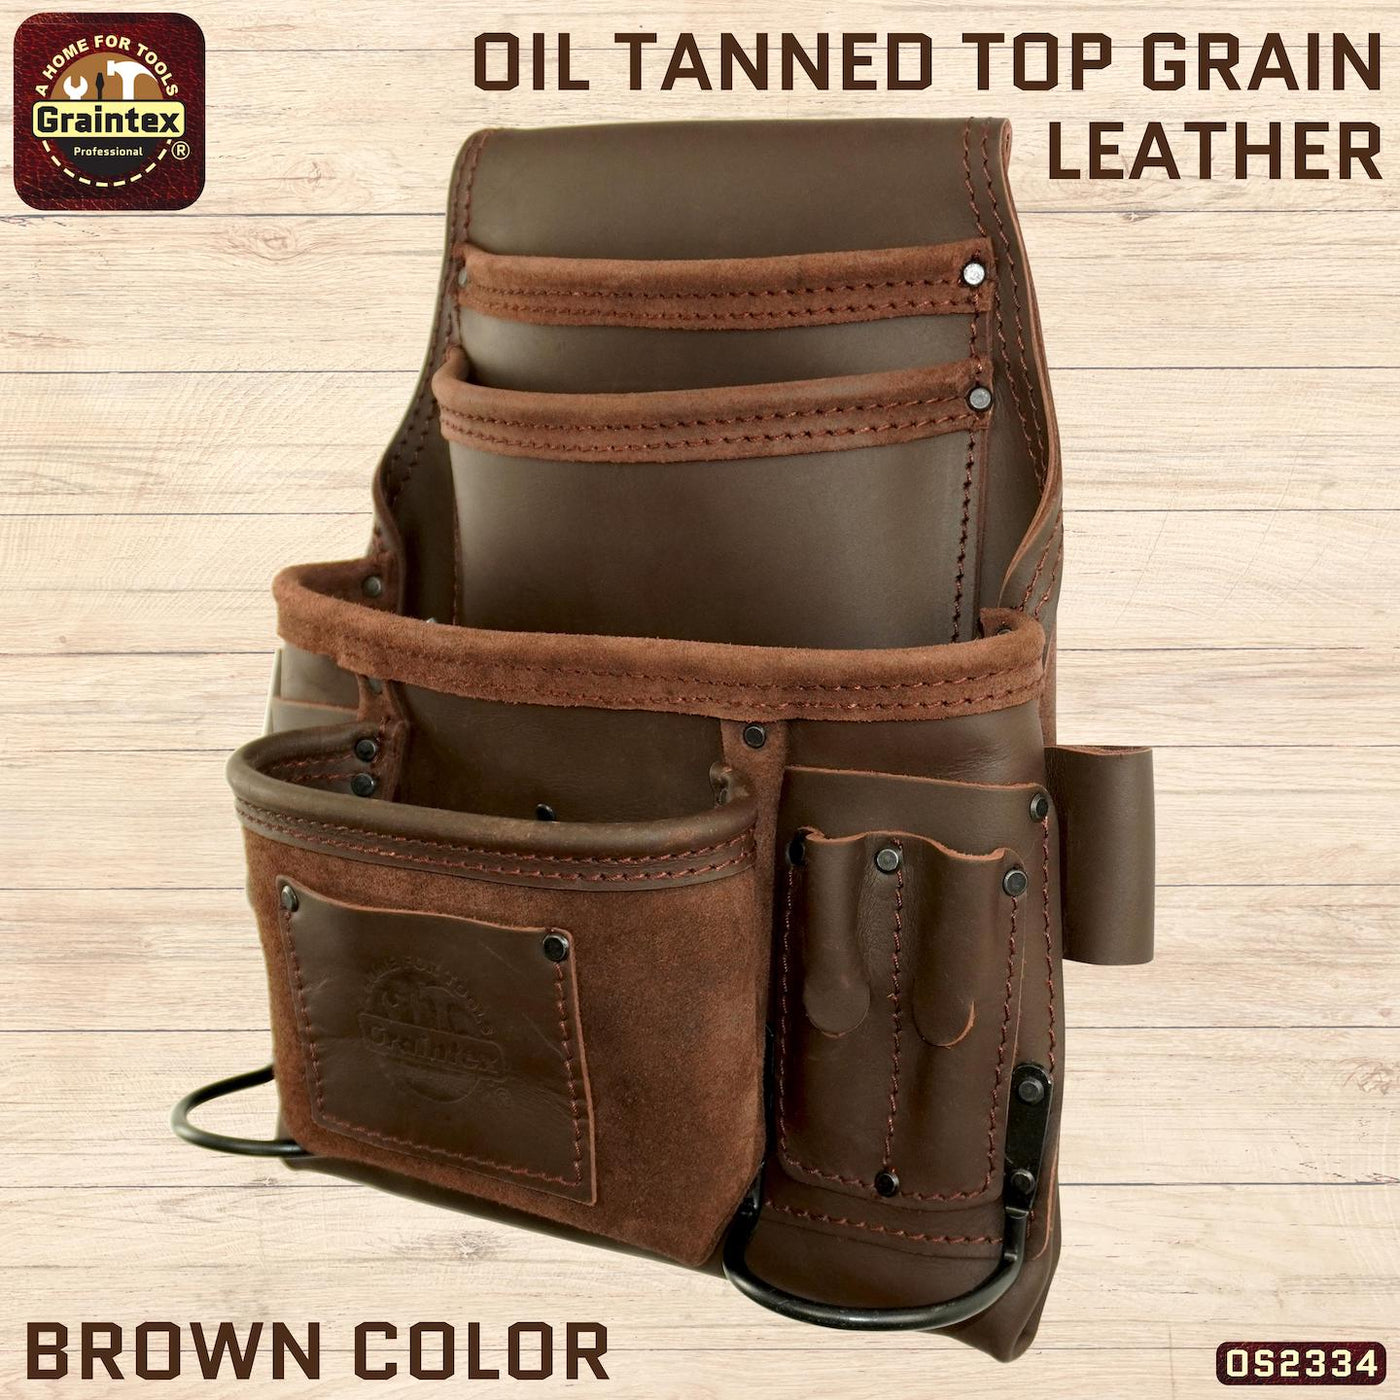 OS2334 :: 10 Pocket Nail & Tool Pouch Brown Color Top Grain Oil Tanned Leather